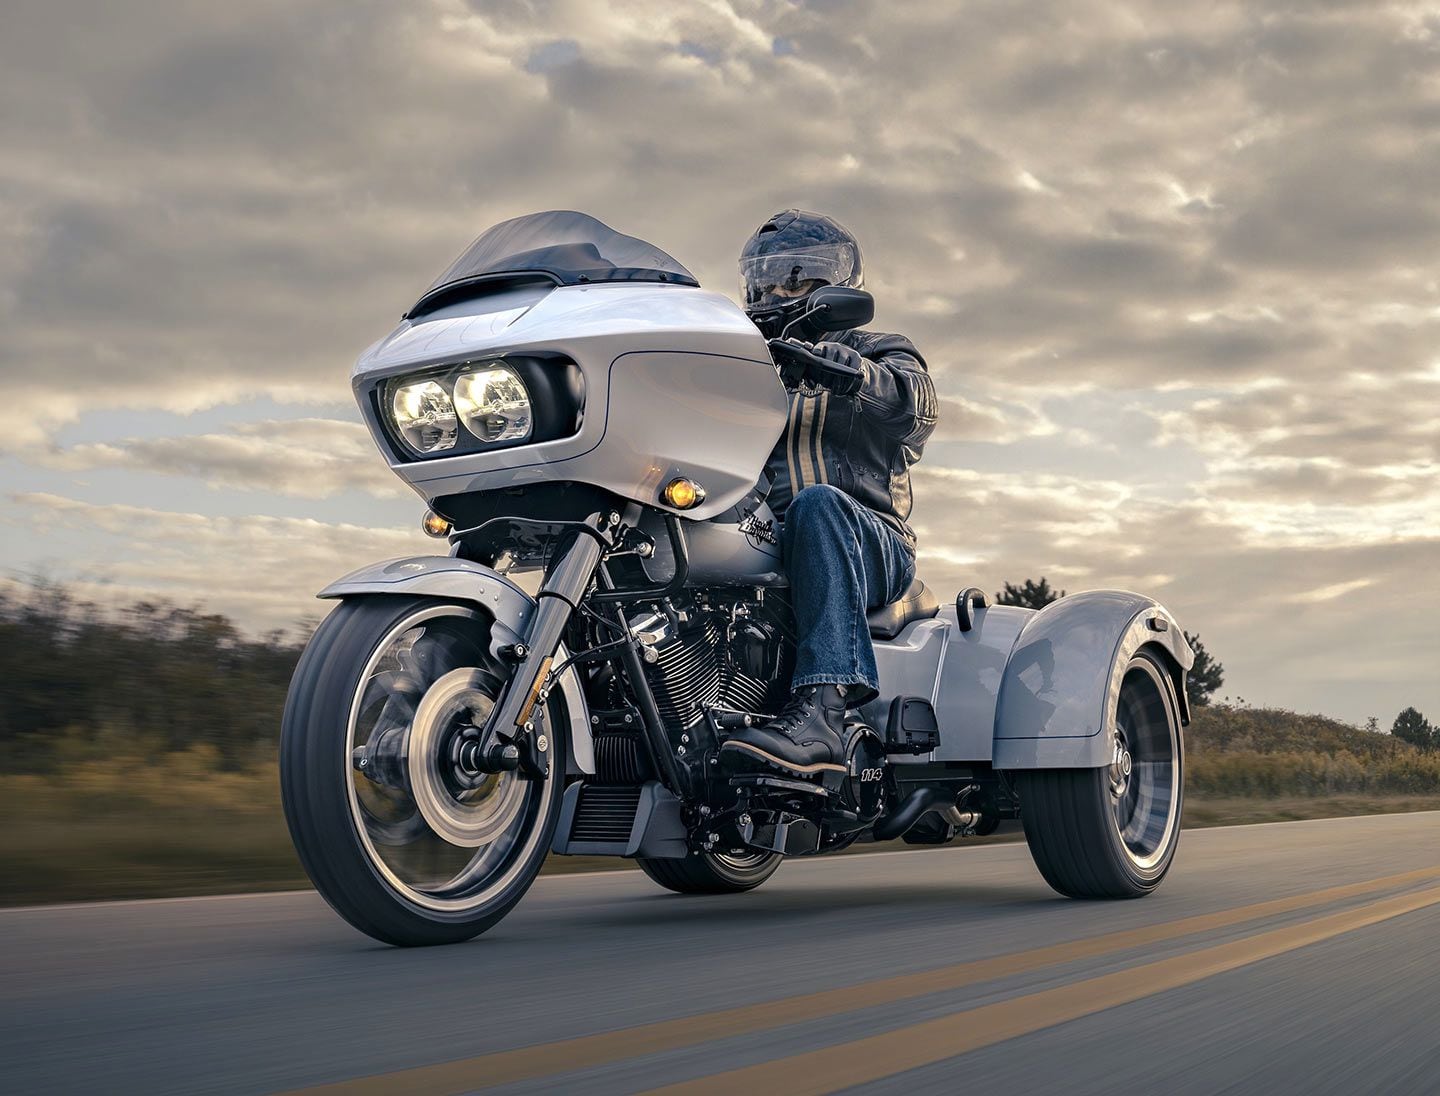 The 2024 Road Glide 3 is one of the returning trike models Harley has announced for the new model year. There are no changes, just new colors.